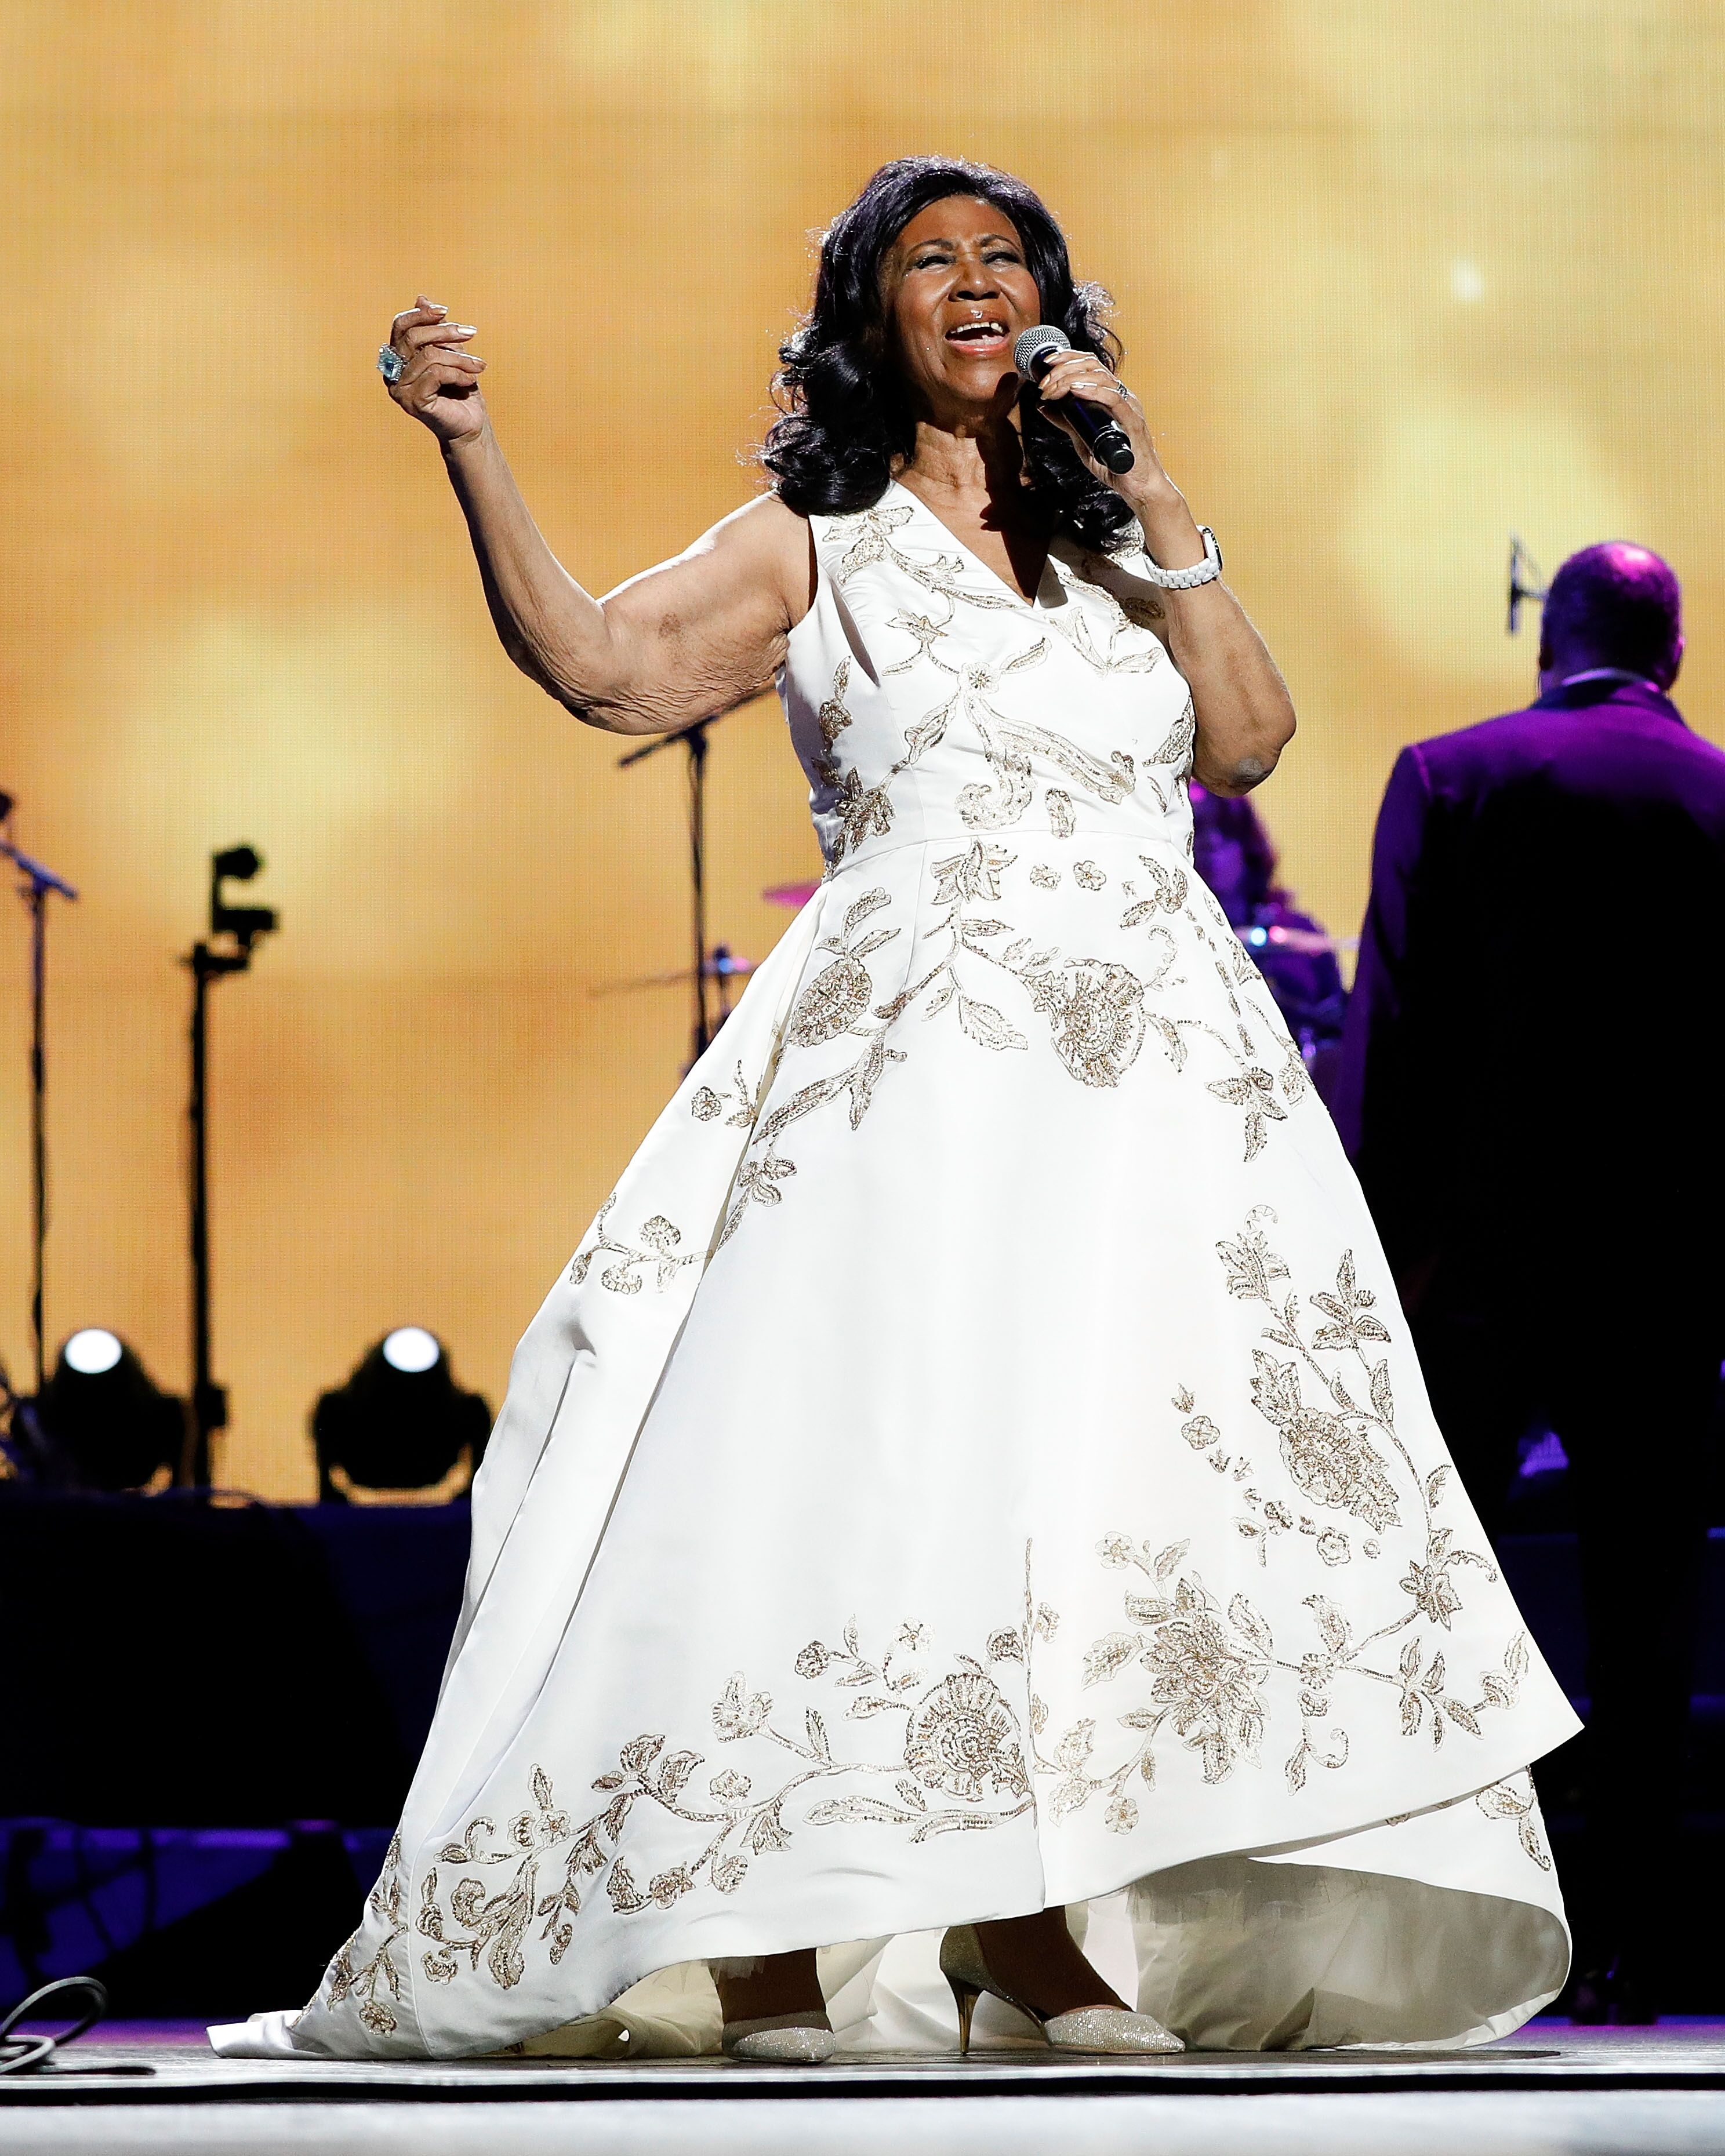 The Queen of Soul, Aretha Franklin, performing on-stage | Source: Getty Images/GlobalImagesUkraine